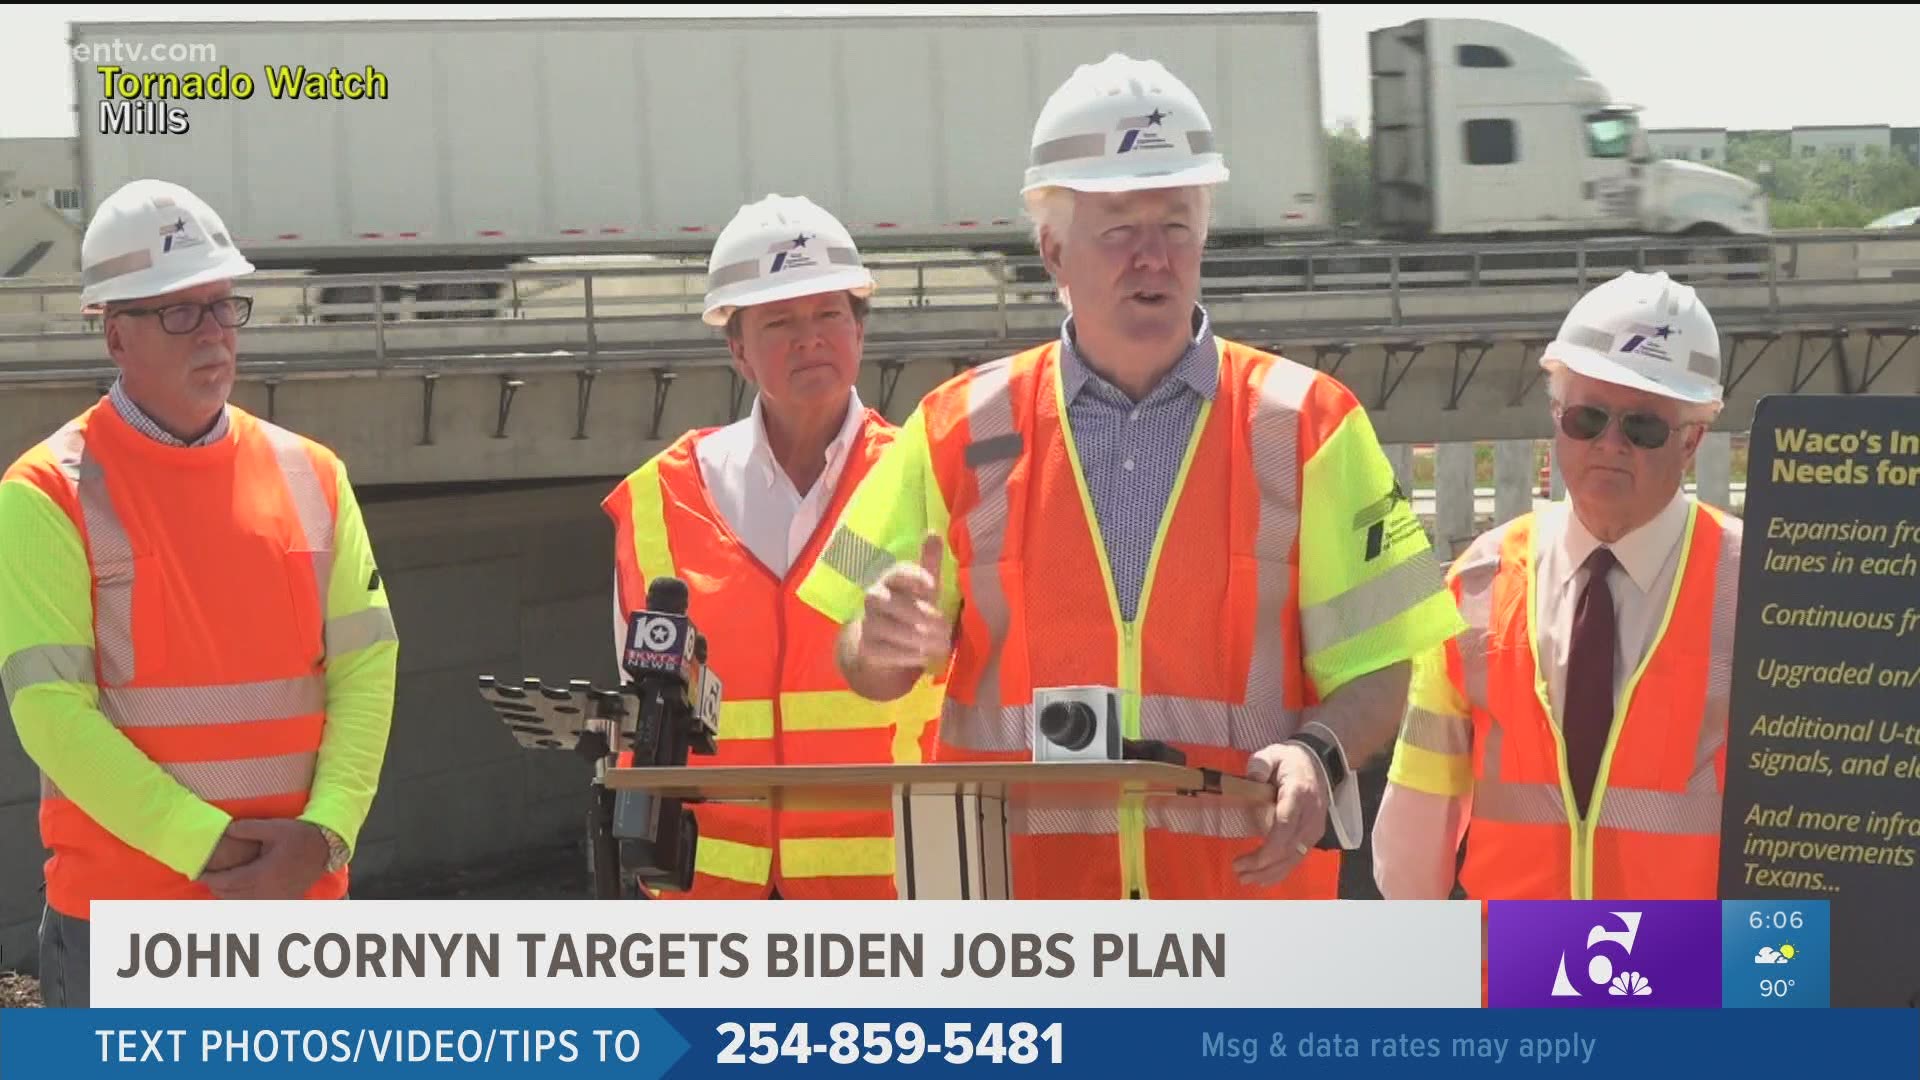 Cornyn toured the I-35 expansion in Waco and said many good things about TxDOT's work, but had other things to say about Biden's jobs plan.